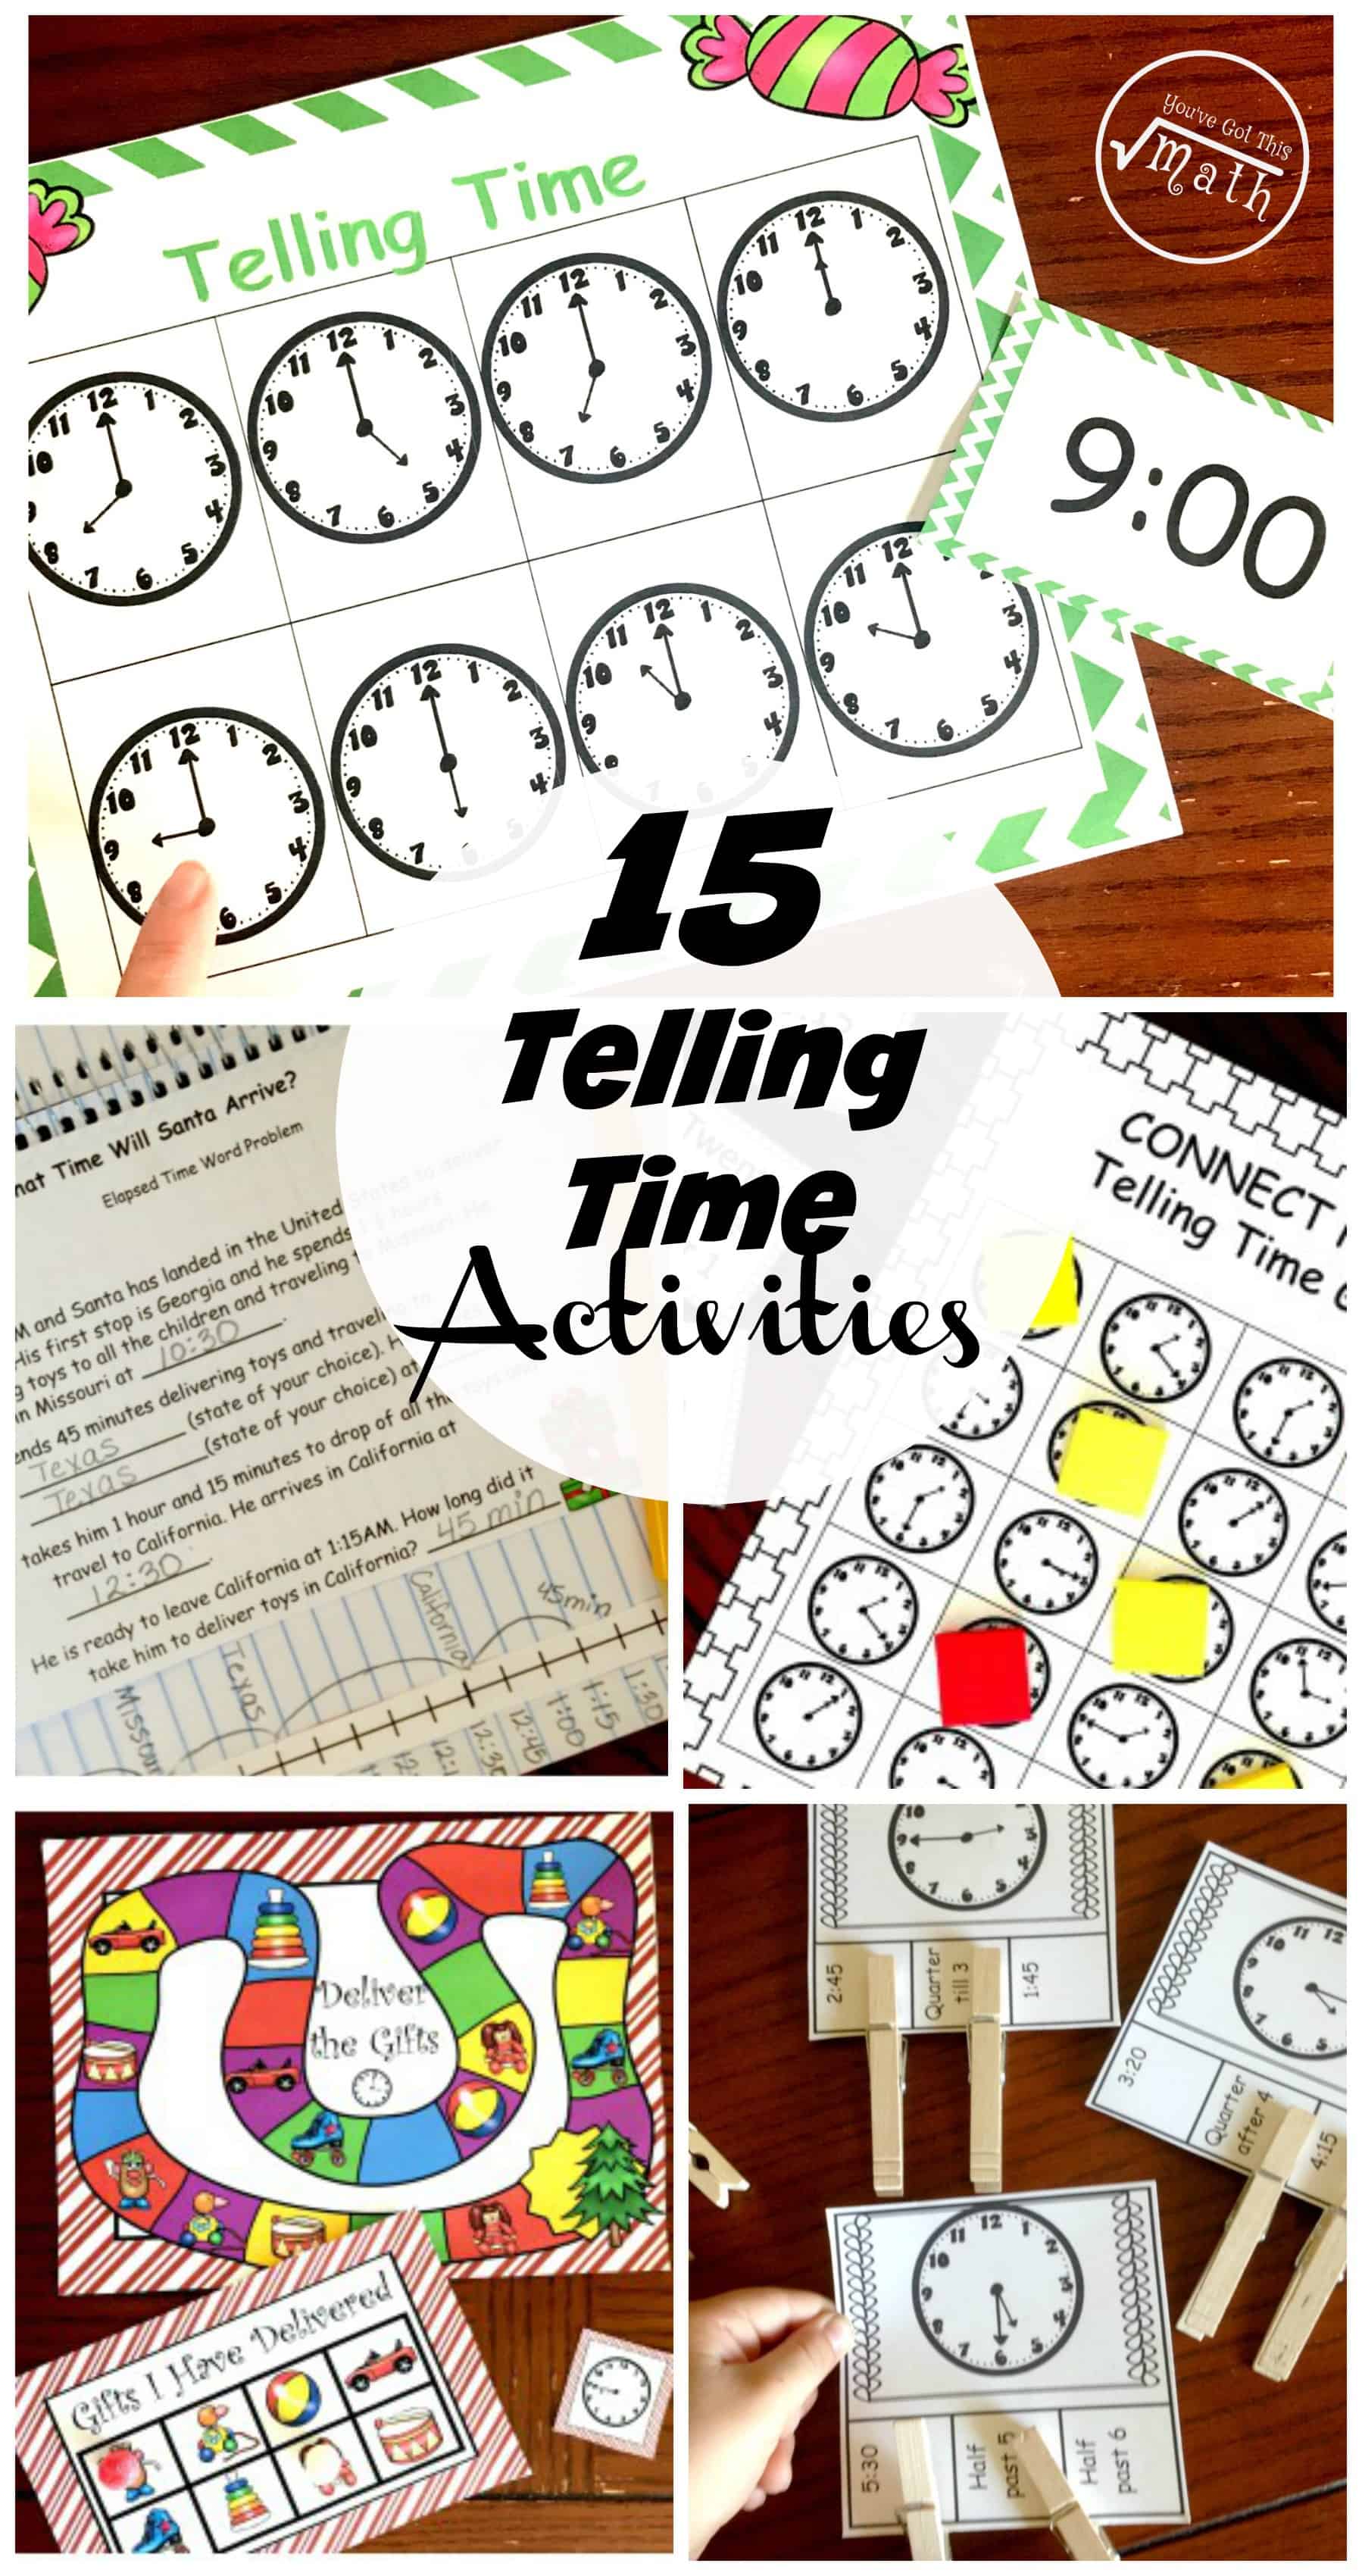 Is it “time” for your kiddos to learn to tell time? Then these 10 fun and engaging ways to teach and practice telling time may be just what you need.